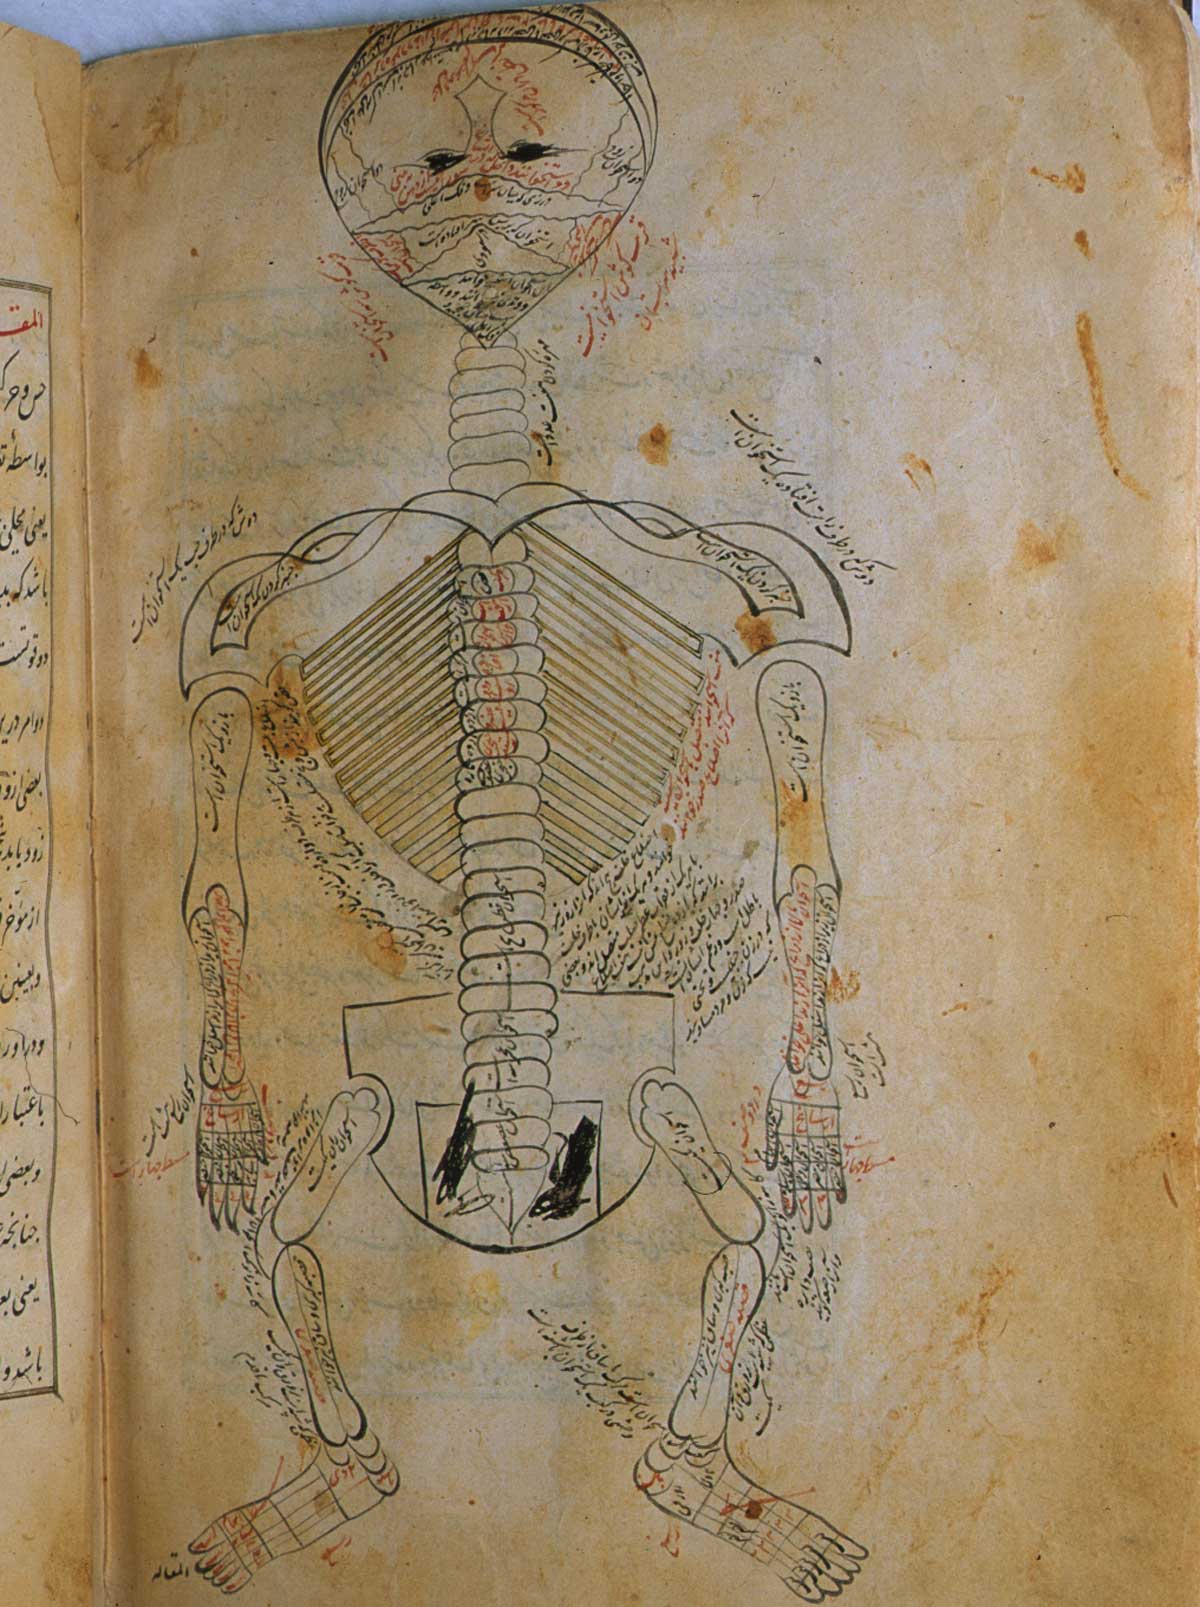 Folio 12b of Mansur ibn Ilyas' Tashrih-i badan-i insan, featuring a hand illustrated skeleton, viewed from behind with the head hyperextended so that the mouth is at the top of the page.